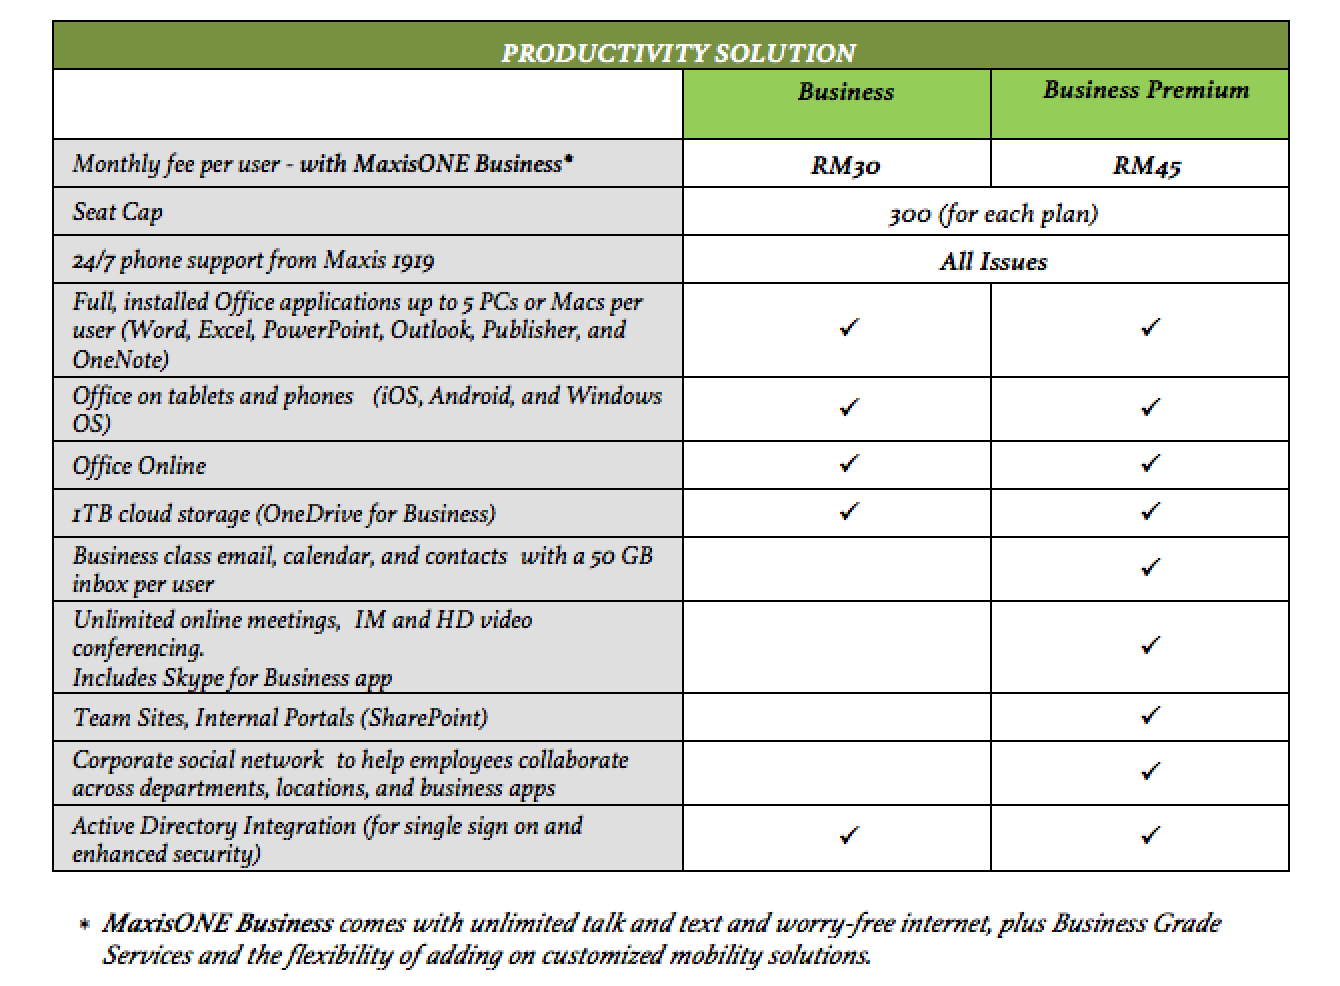 Maxis business plan rate